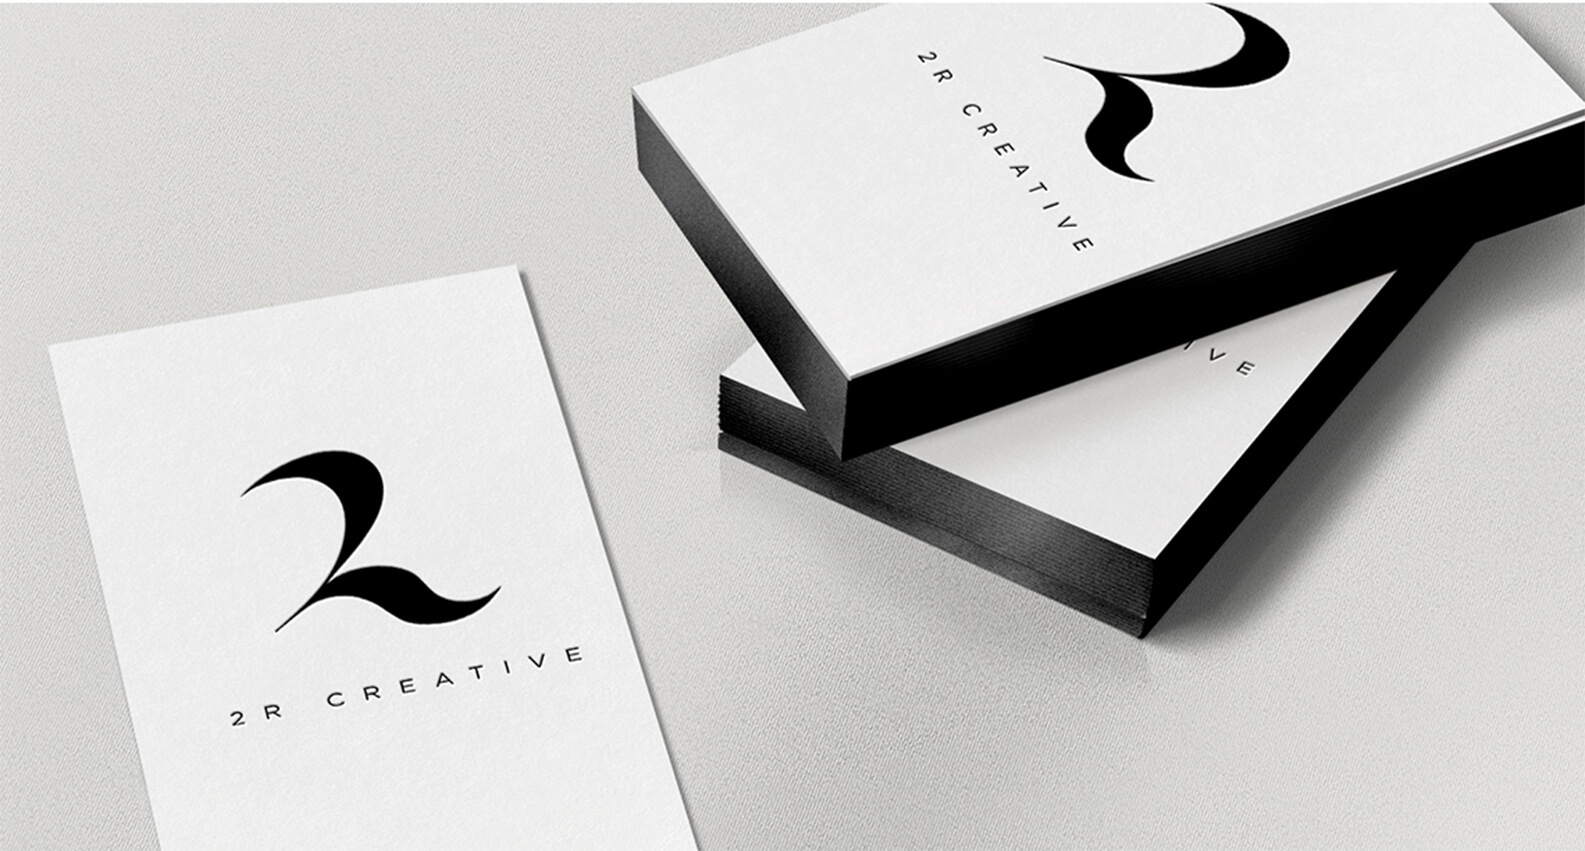 2R Creative business card design by Jacober Creative